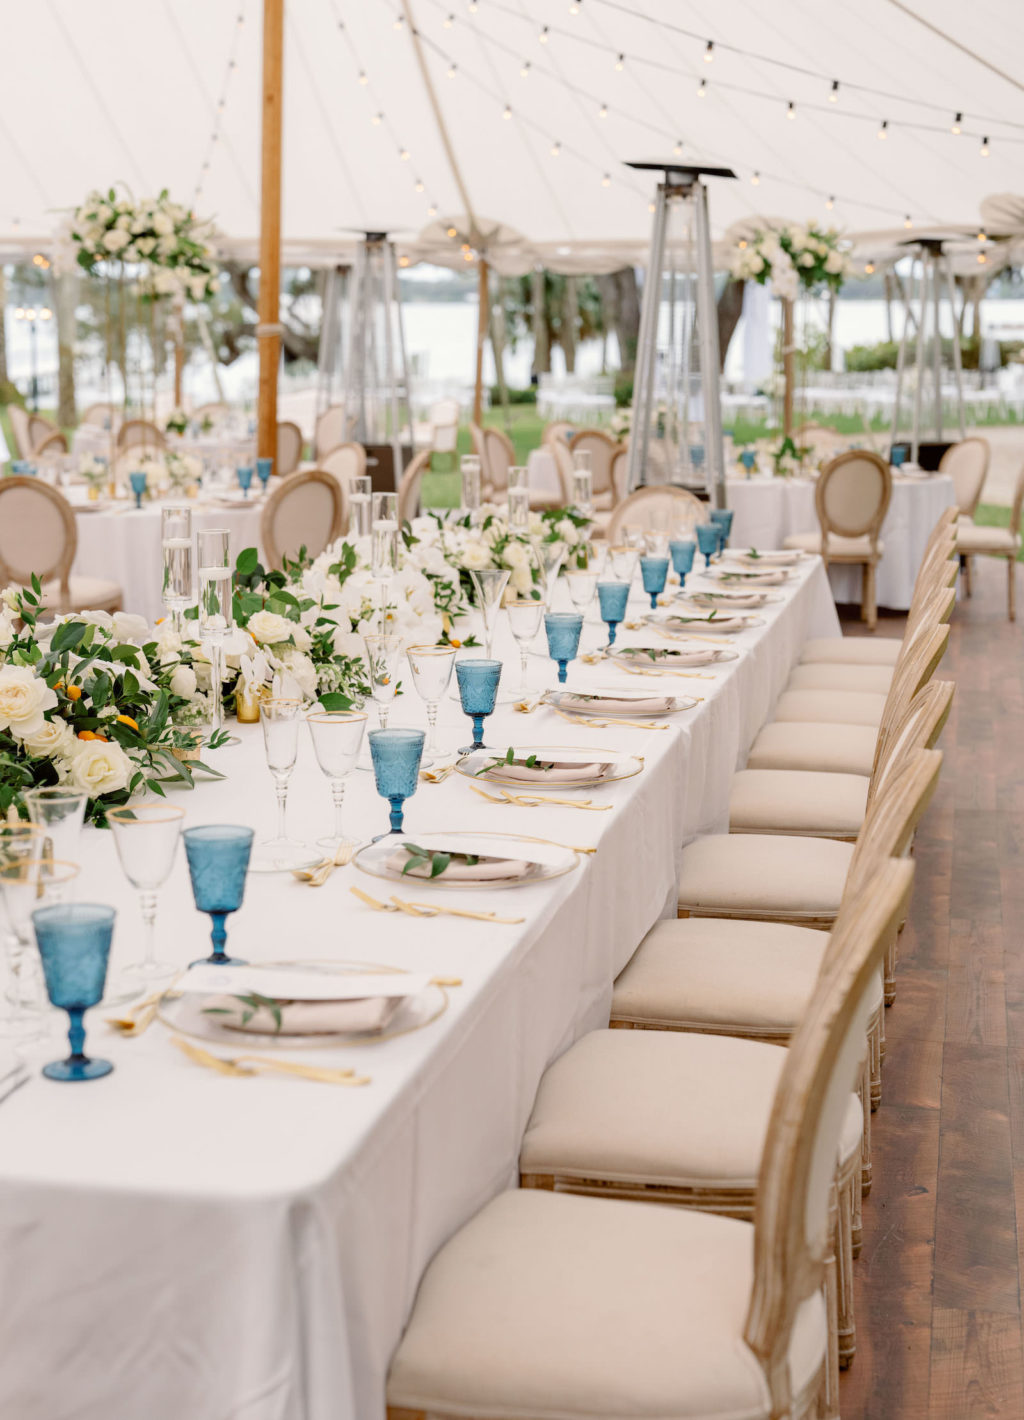 Elegant Luxurious Wedding Tent Reception Decor, Long Feasting Table with White Linens, Blue Glasses and White with Greenery Floral Arrangements, Bistro Hanging Lights Wooden and French Country Dining Chairs | Tampa Bay NK Productions Wedding Planning